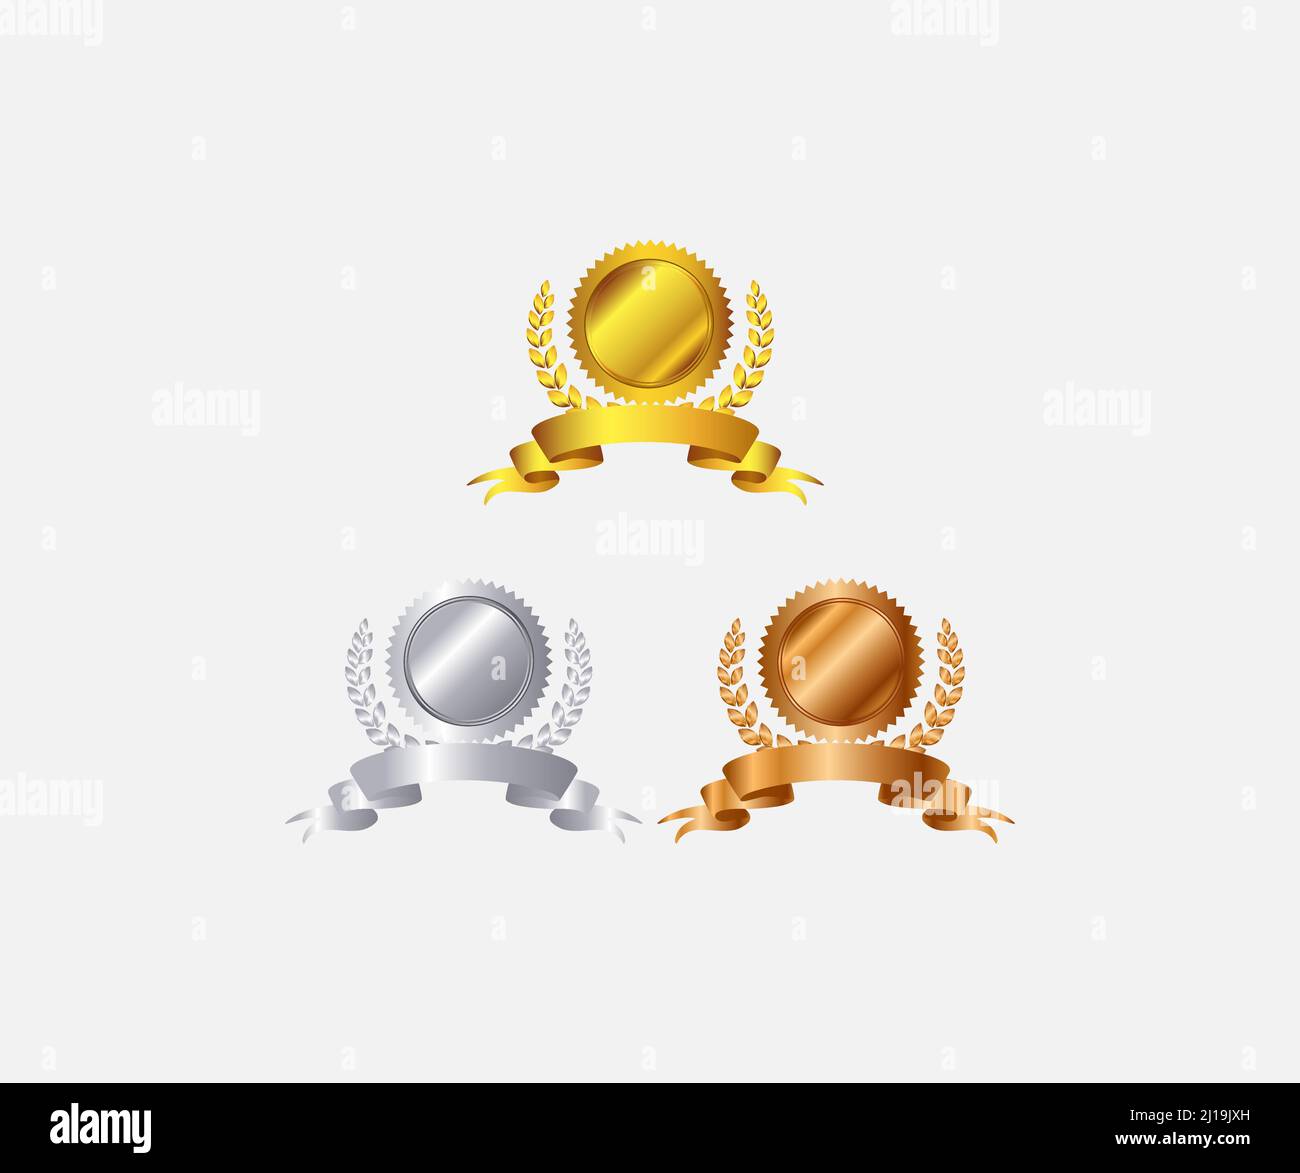 First prize award image Royalty Free Stock SVG Vector